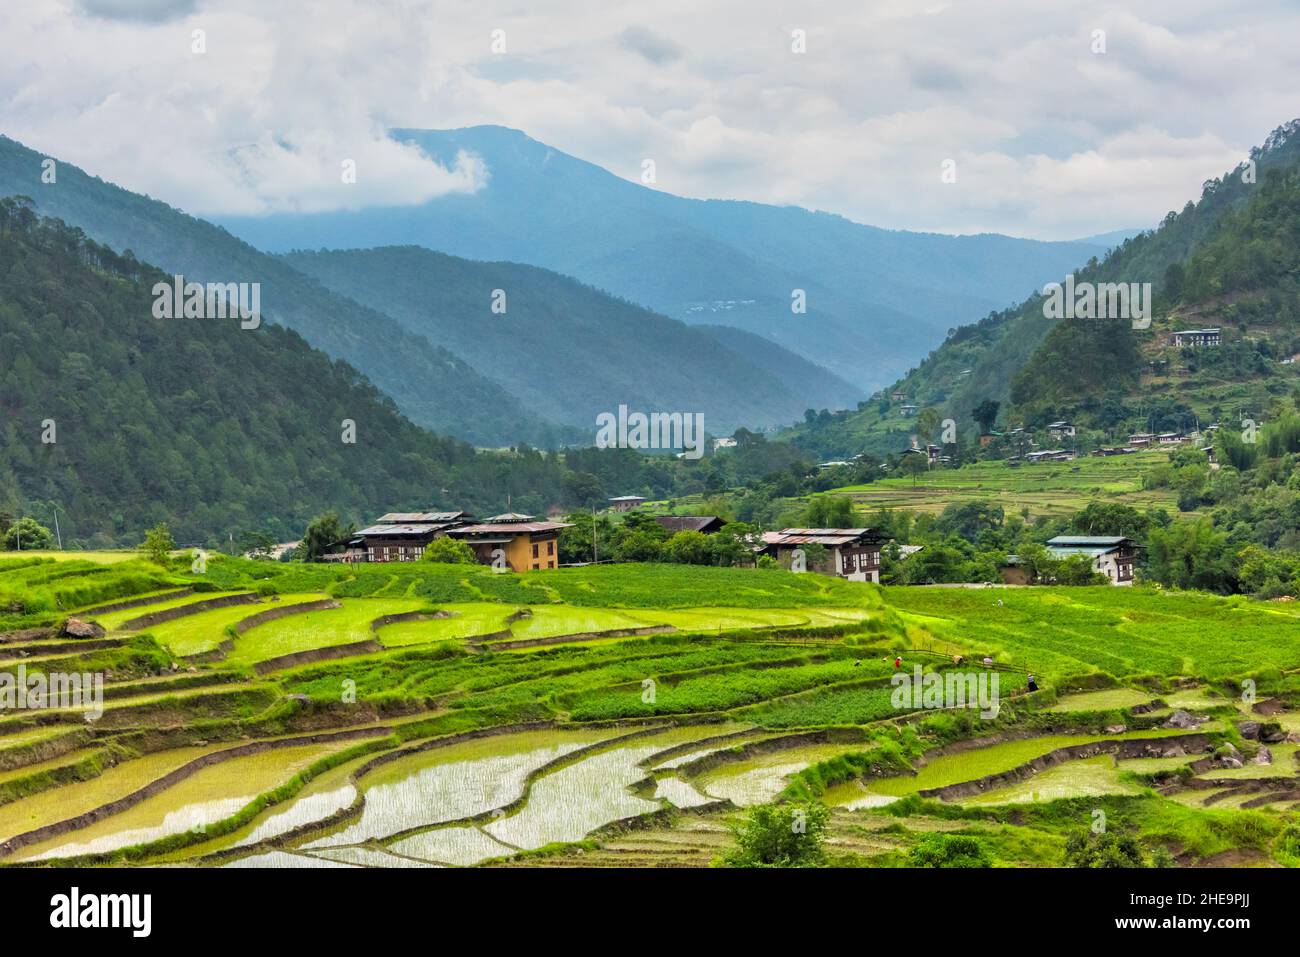 Village houe and rice poaddy in the Himalayas, Punakha, Bhutan Stock Photo